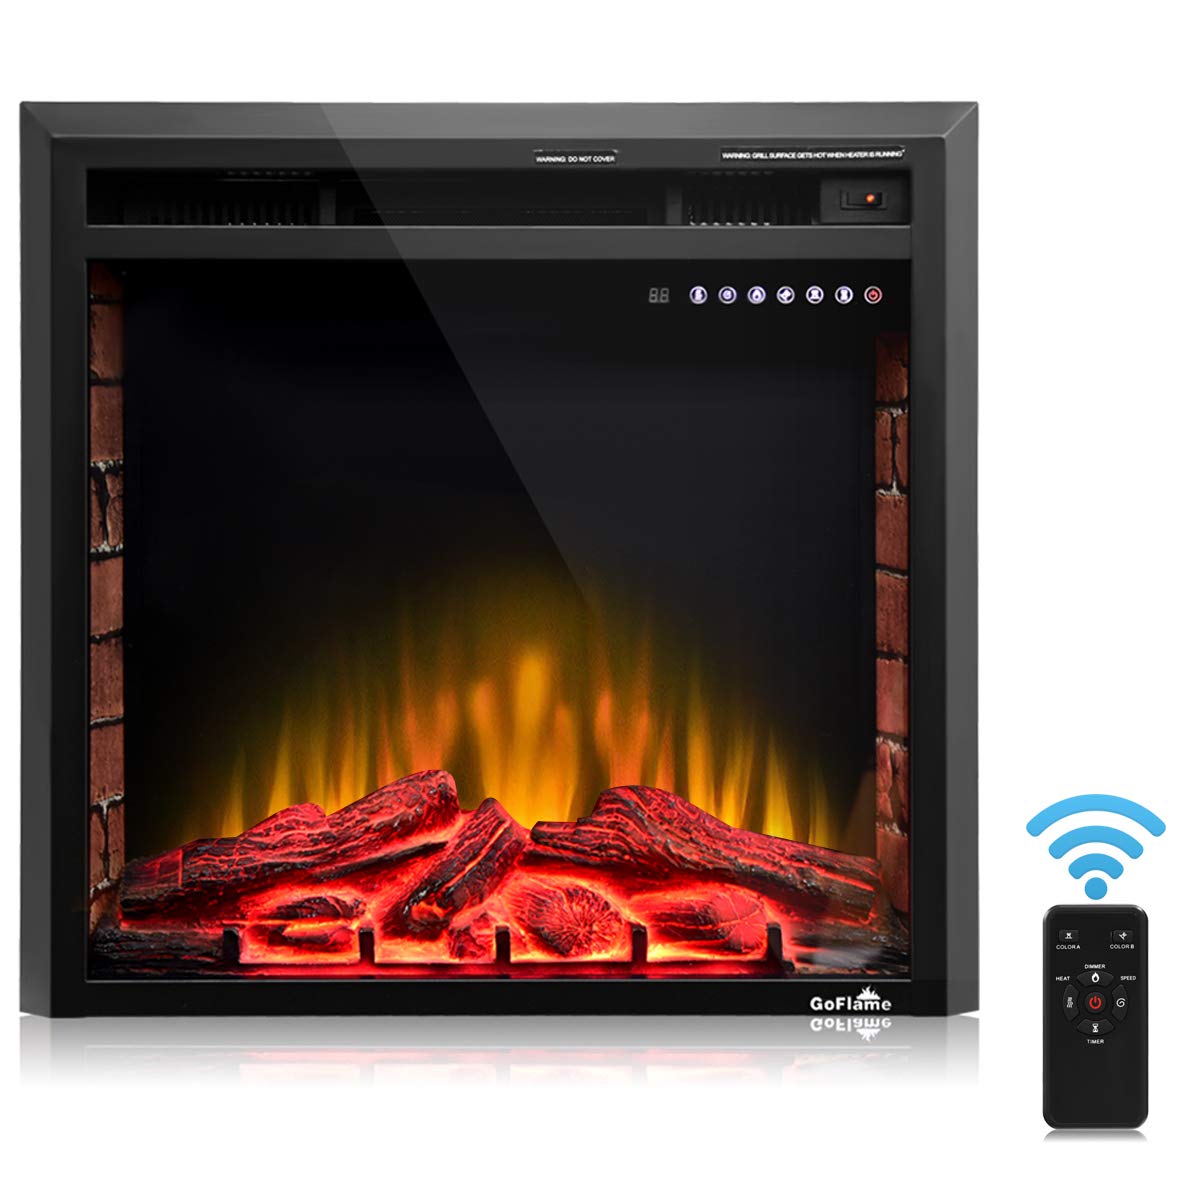 High Btu Electric Fireplace Best Of Best fort Recessed 36" Electric Fireplace Multi Operating Electric Fireplace Insert with Remote 750w 1500w Built In Electric Fireplace